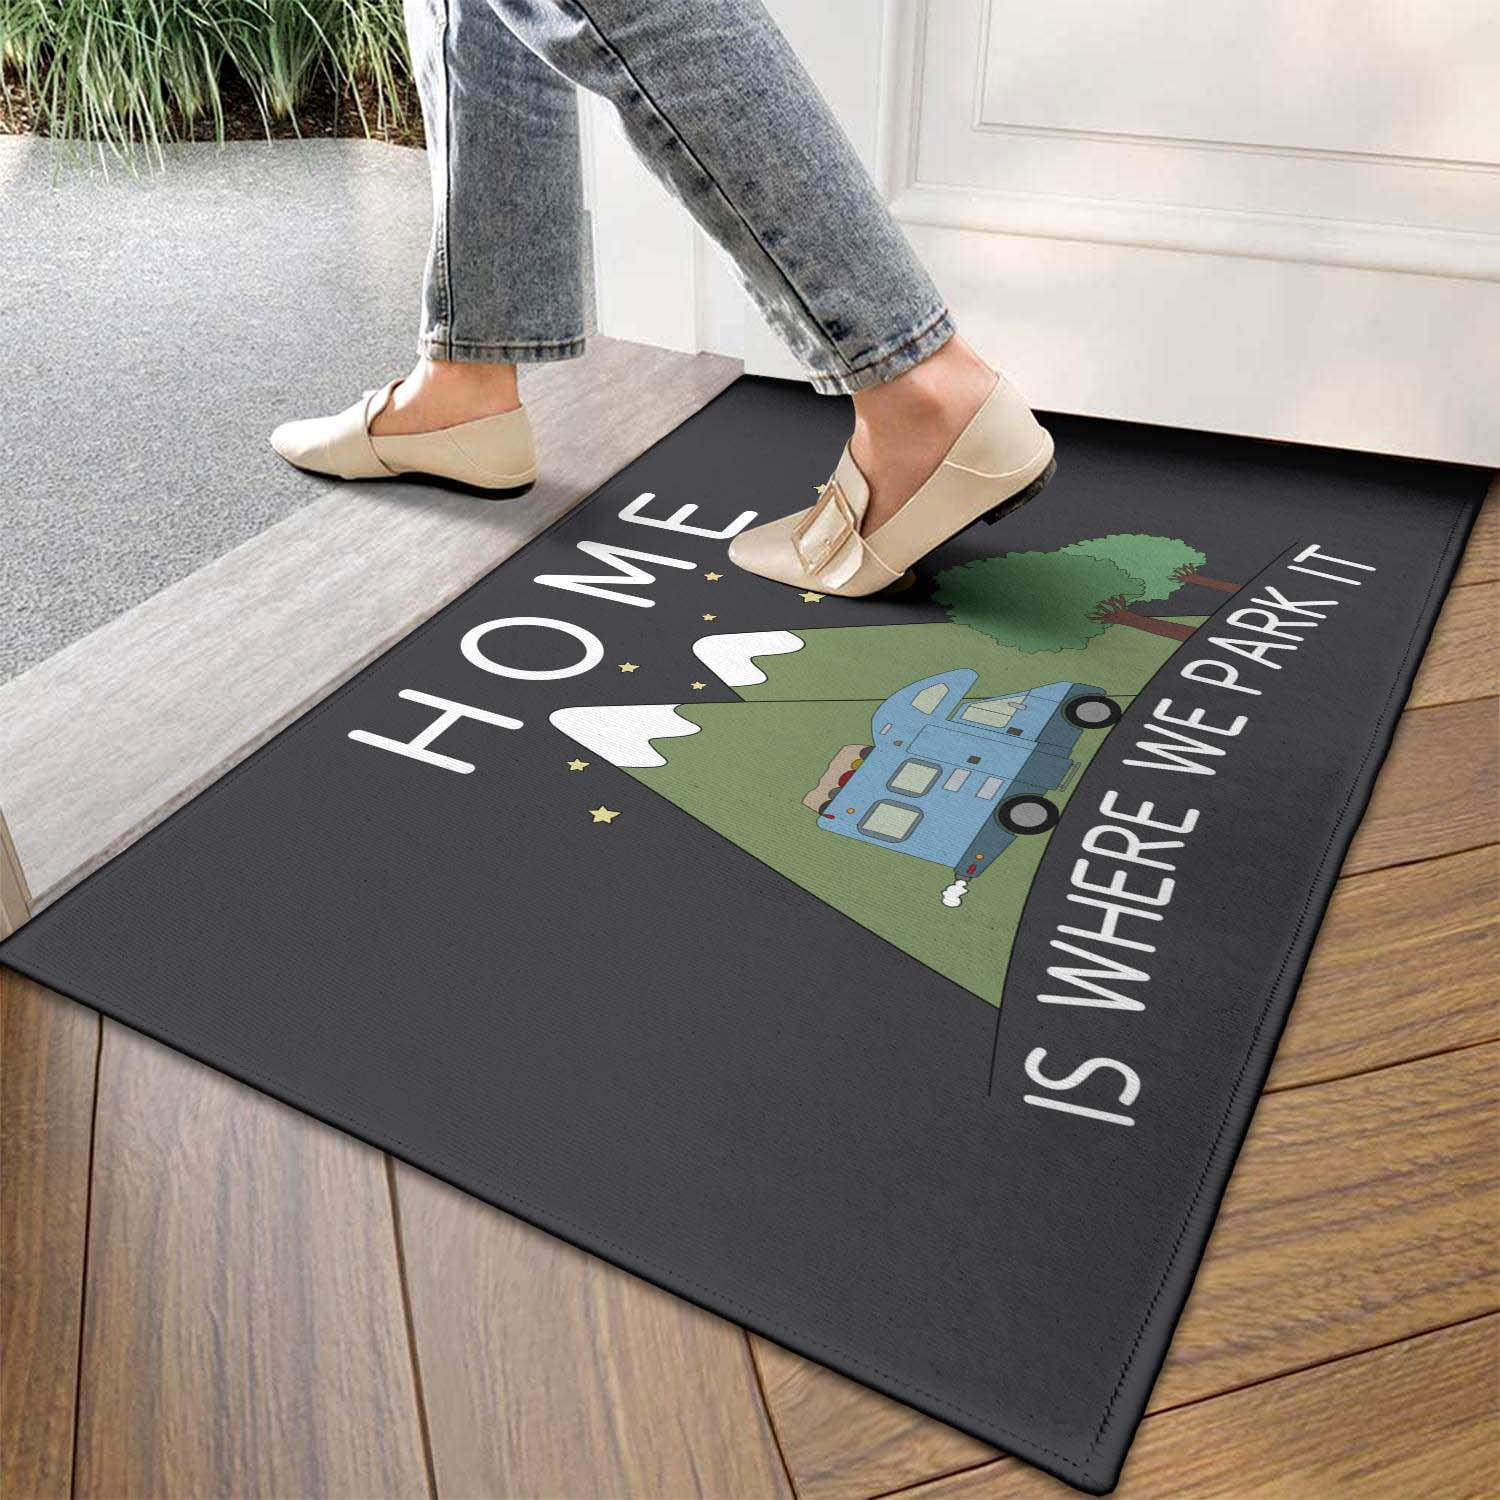 Personalized Camping Doormat, Custom RV Door Mat, Coir Welcome Mat For A  Campsite, Camping Gift, Home is Where you Park It, Class A RV Mat